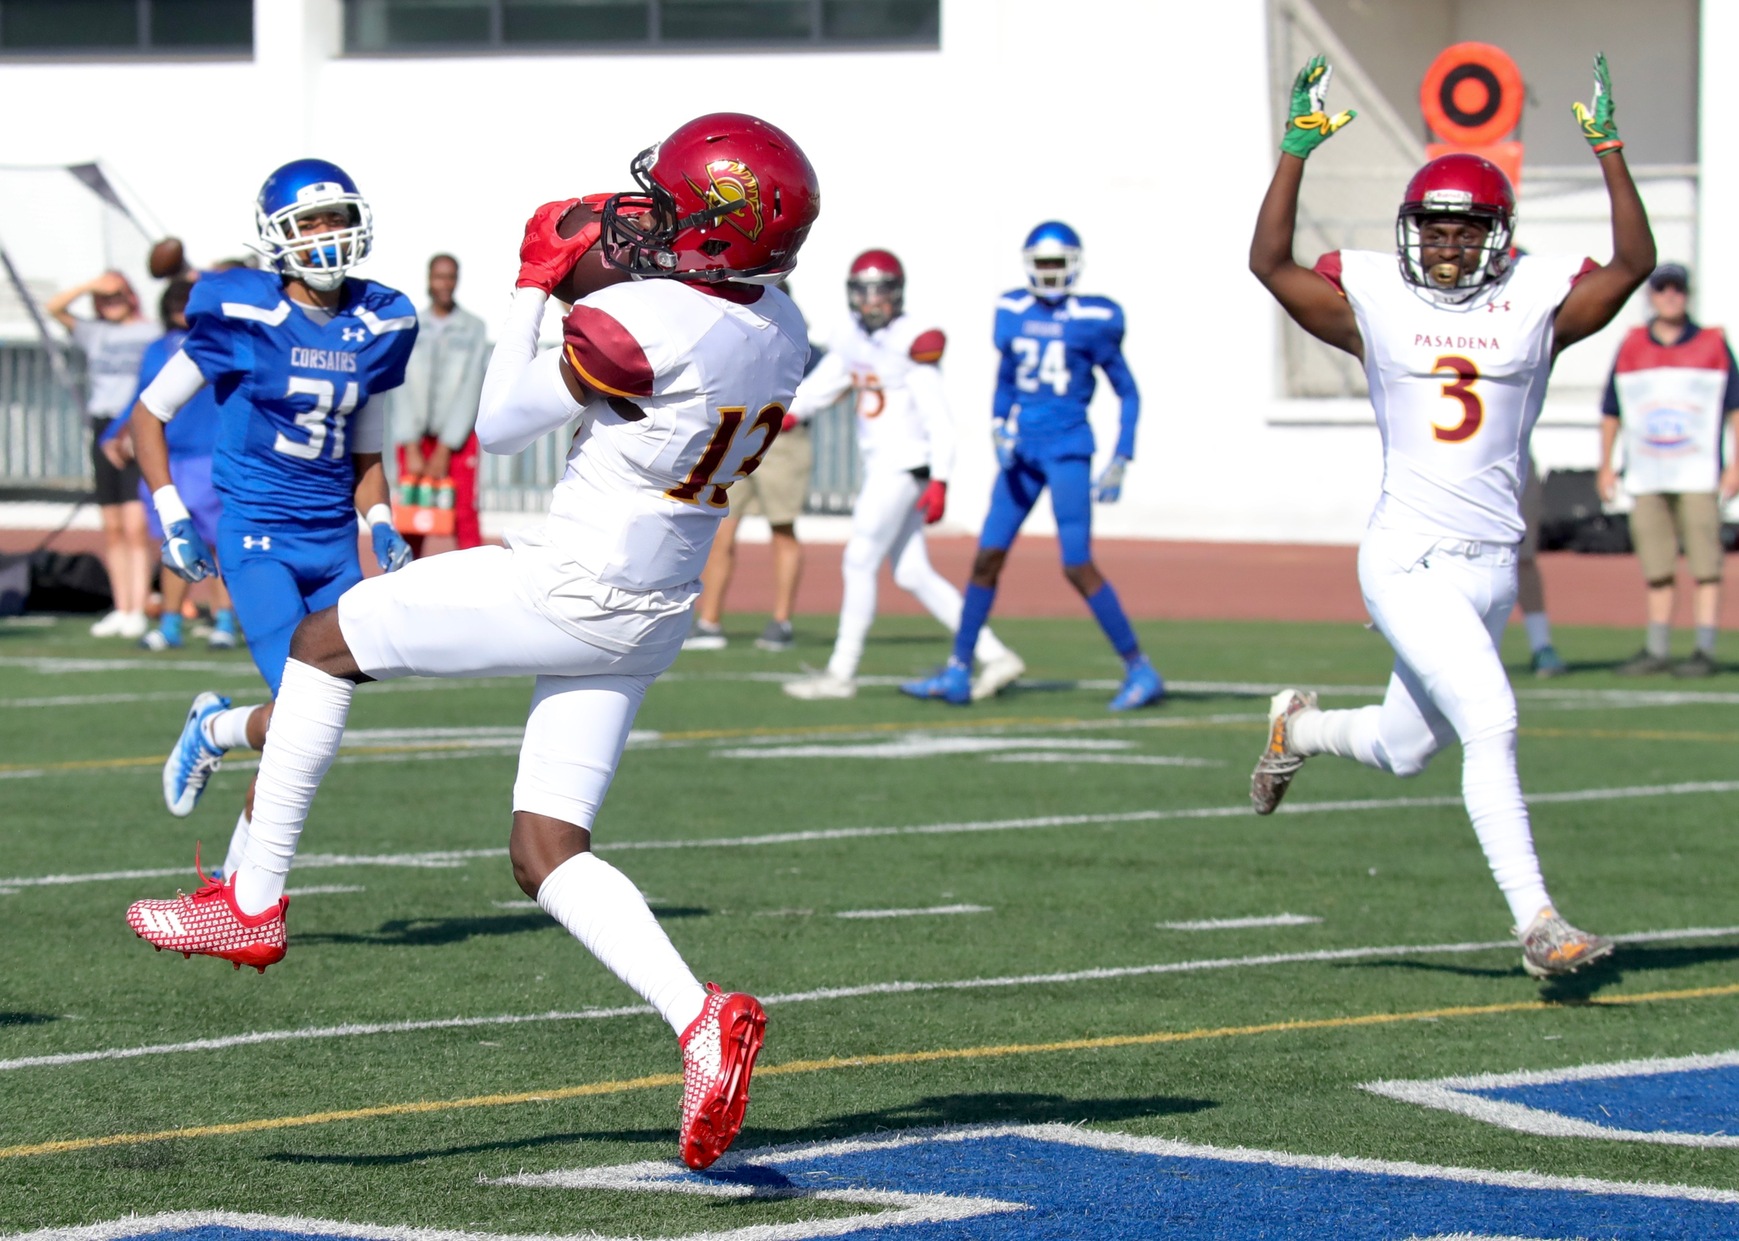 Ahmad Lipscomb hauls in a touchdown pass from Edward Norton as teammate Jabari Kindle plays referee on the play during PCC's rout at Santa Monica College Saturday afternoon, photo by Michael Watkins.